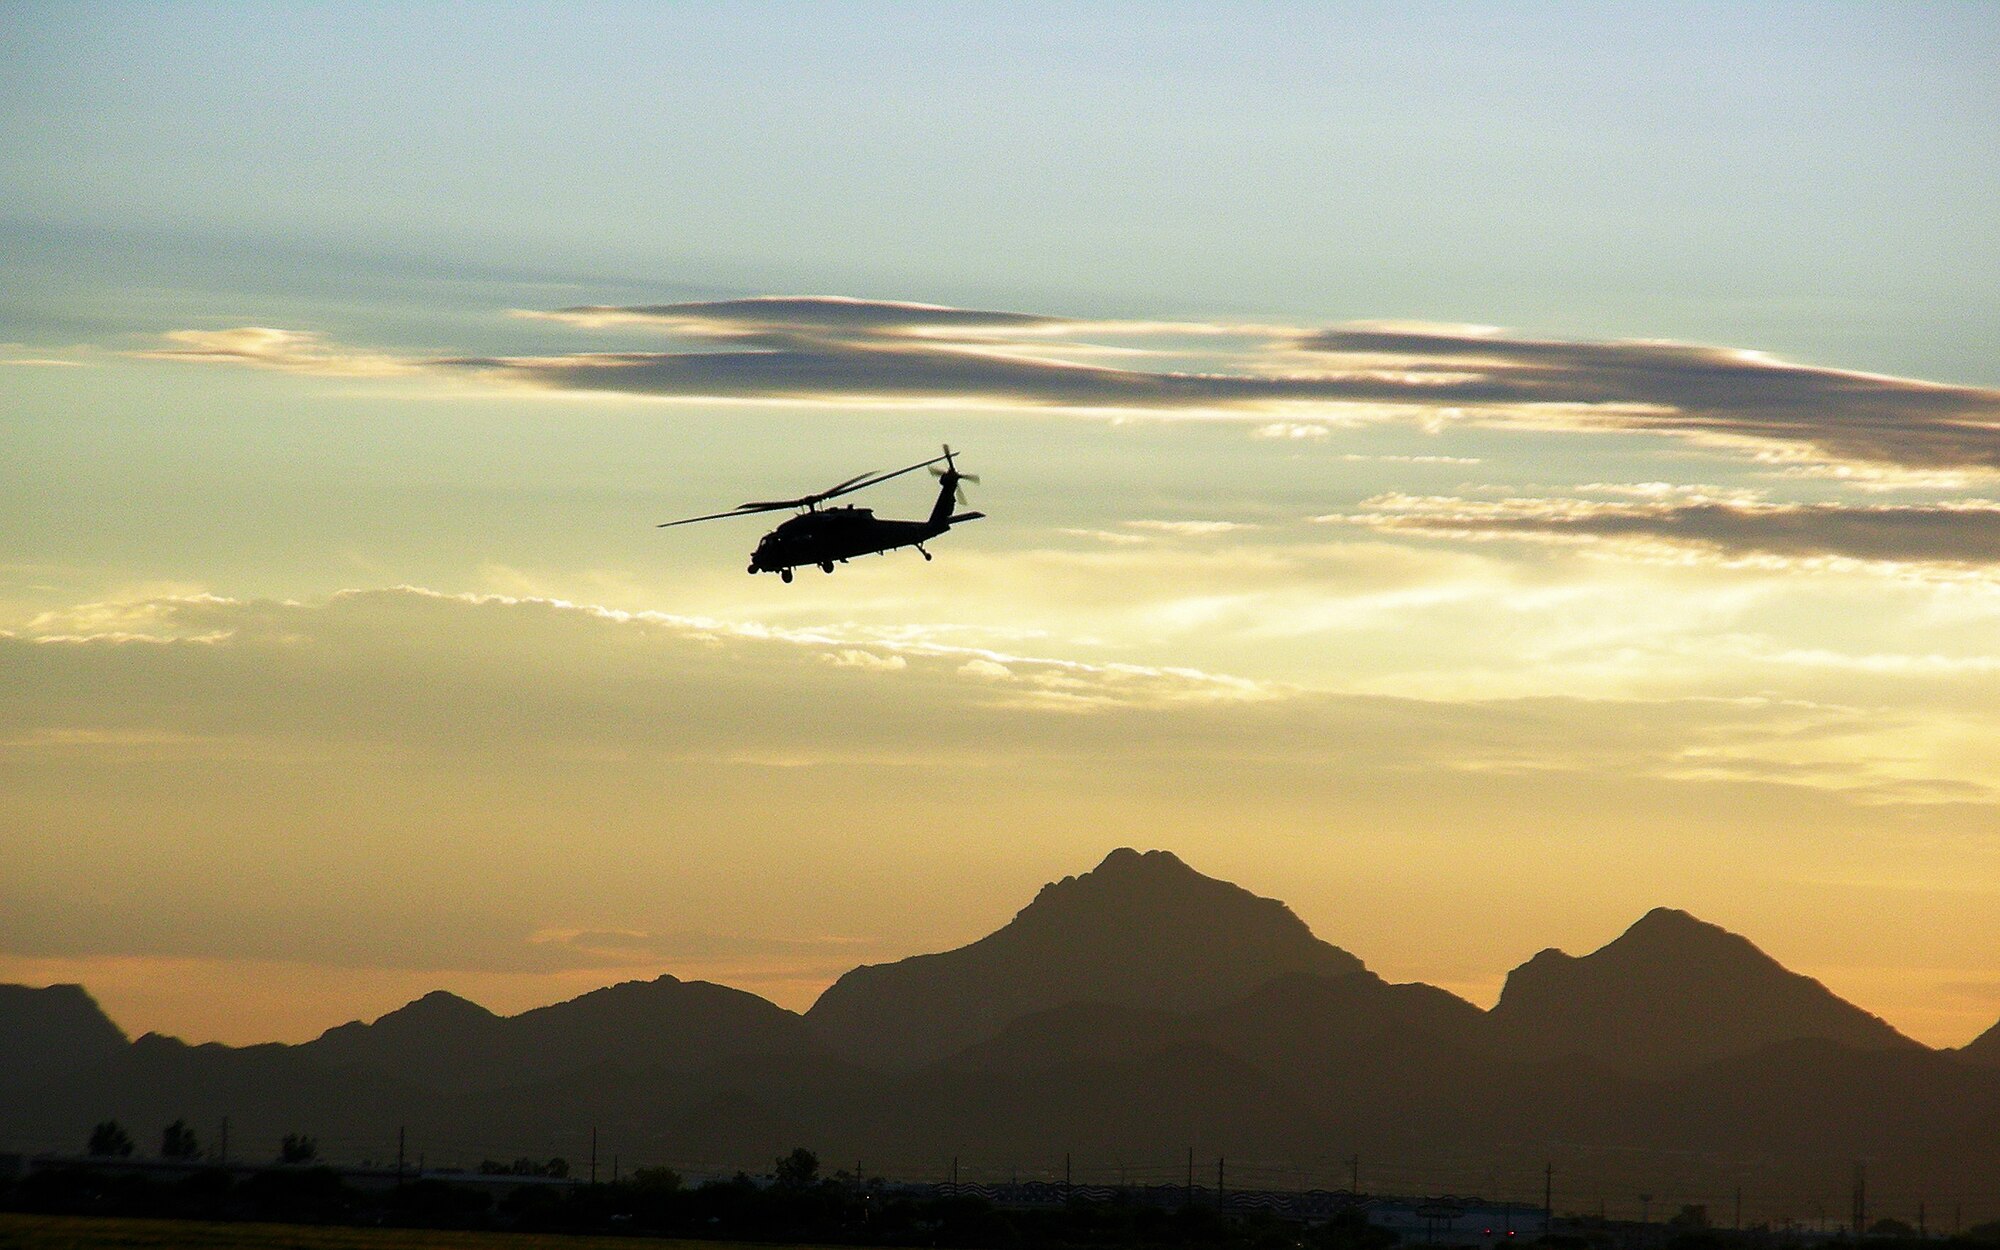 DAVIS-MONTHAN AIR FORCE BASE, Ariz. - A 920th Rescue Wing HH-60G Pave Hawk helicopter pierces the desert sky over the southern-Arizona mountains as part of two-weeks of high-altitude training as pilots and aircrews from the 920th Rescue Wing here trained July 12-25 at Davis-Monthan Air Force Base, Ariz. Aircrews and maintainers worked day and night to gain high-altitude experience prior to their upcoming deployment to Afghanistan. The country is known for having the roughest terrain with some of the highest mountains in the world. (U.S. Air Force Photo/Capt. Cathleen Snow)